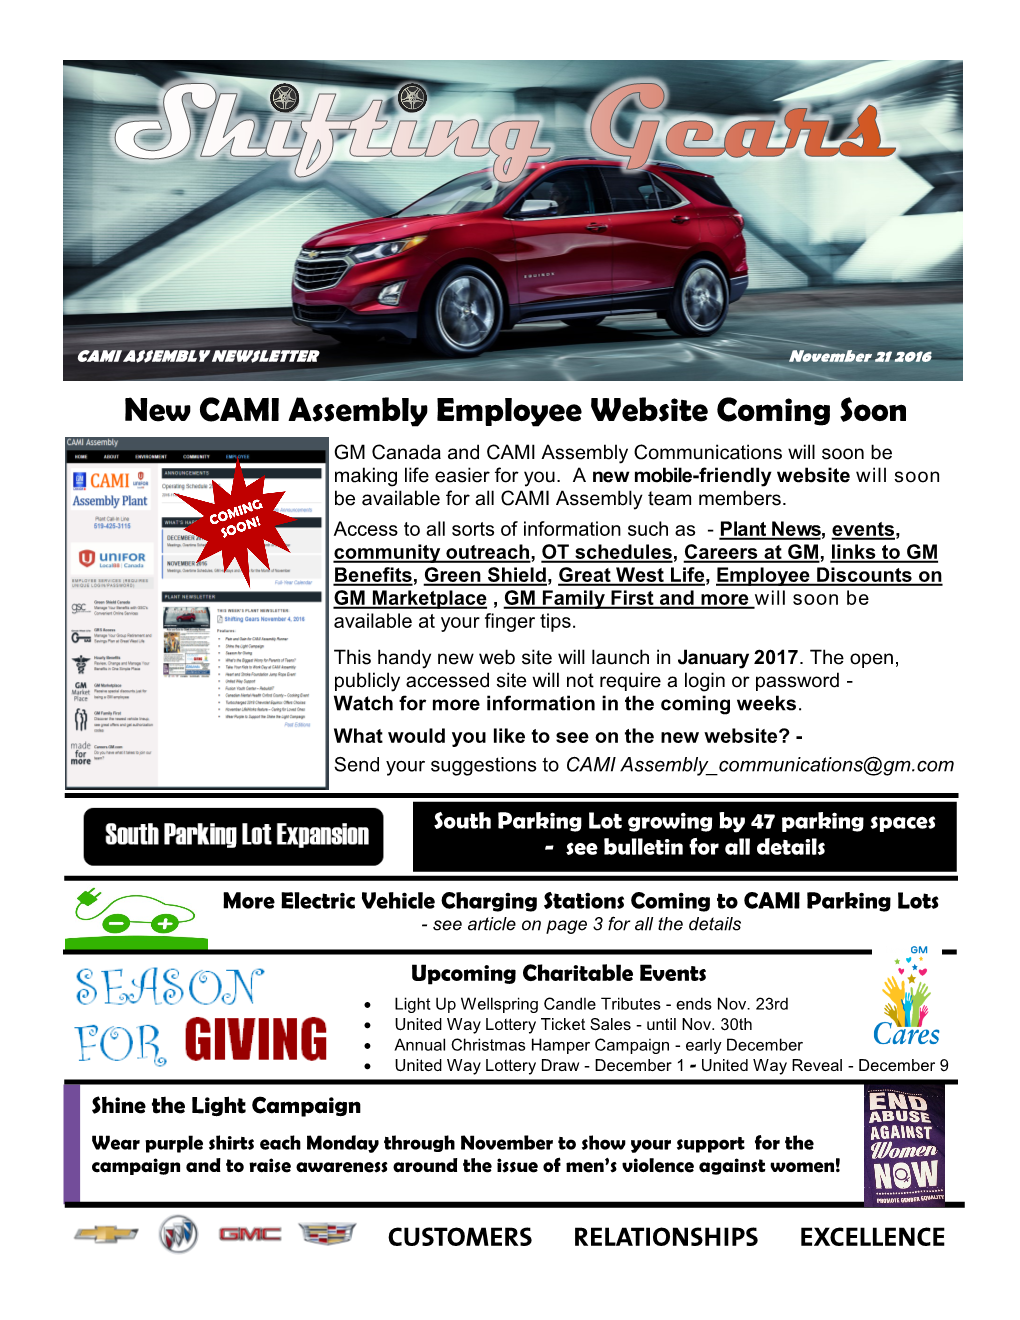 New CAMI Assembly Employee Website Coming Soon GM Canada and CAMI Assembly Communications Will Soon Be Making Life Easier for You